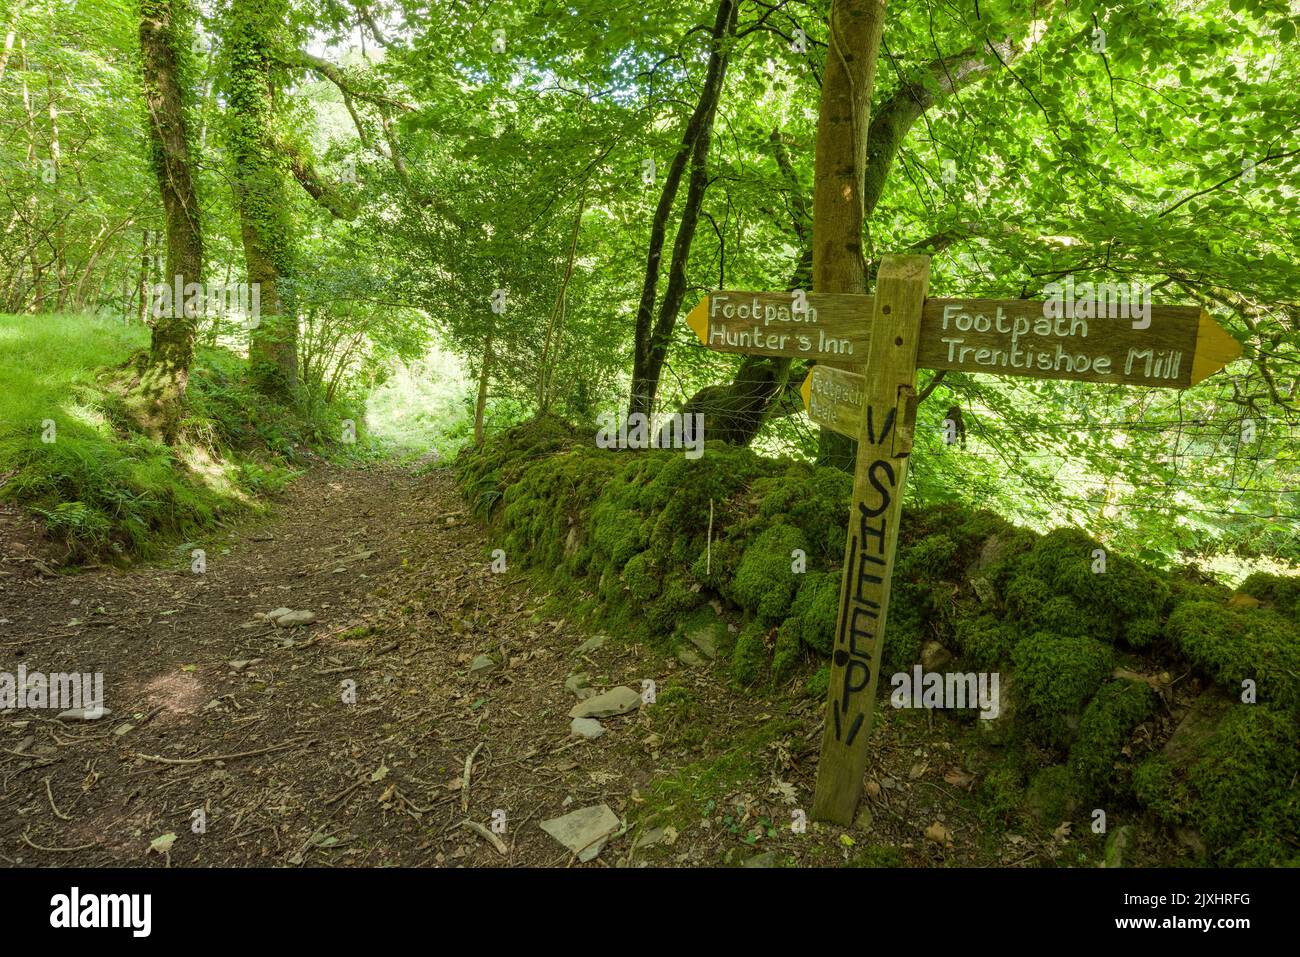 A wooden signpost below Trentishoe Down on the footpath between The Hunters Inn and Mill Ham near the Heddon Valley in the Exmoor National Park, North Devon, England. Stock Photo